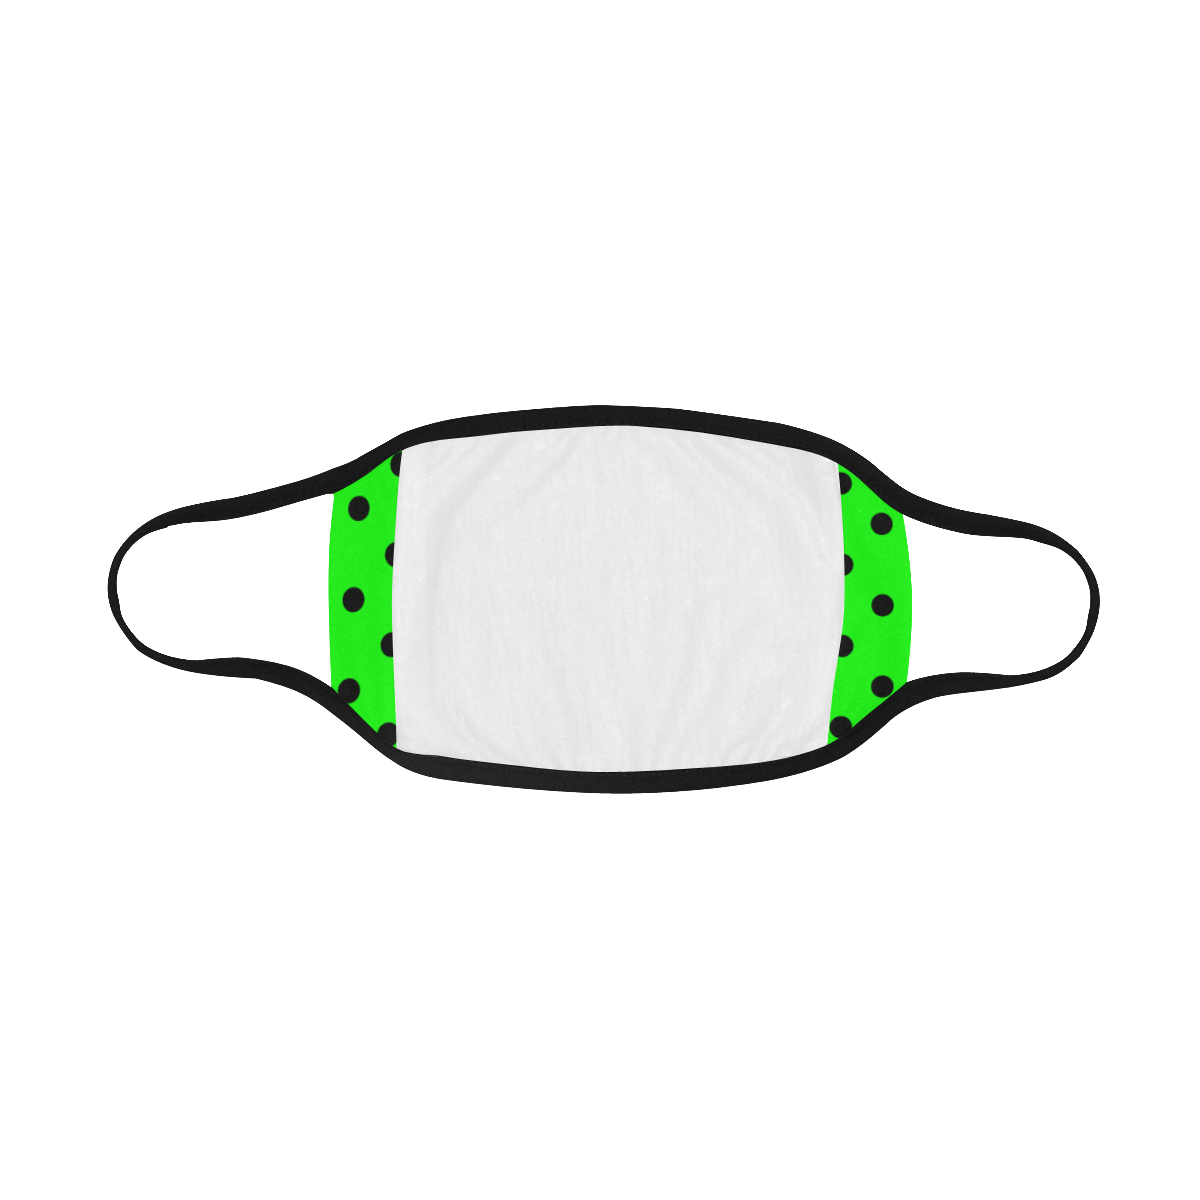 Polka Dots Black on Neon Green Mouth Mask